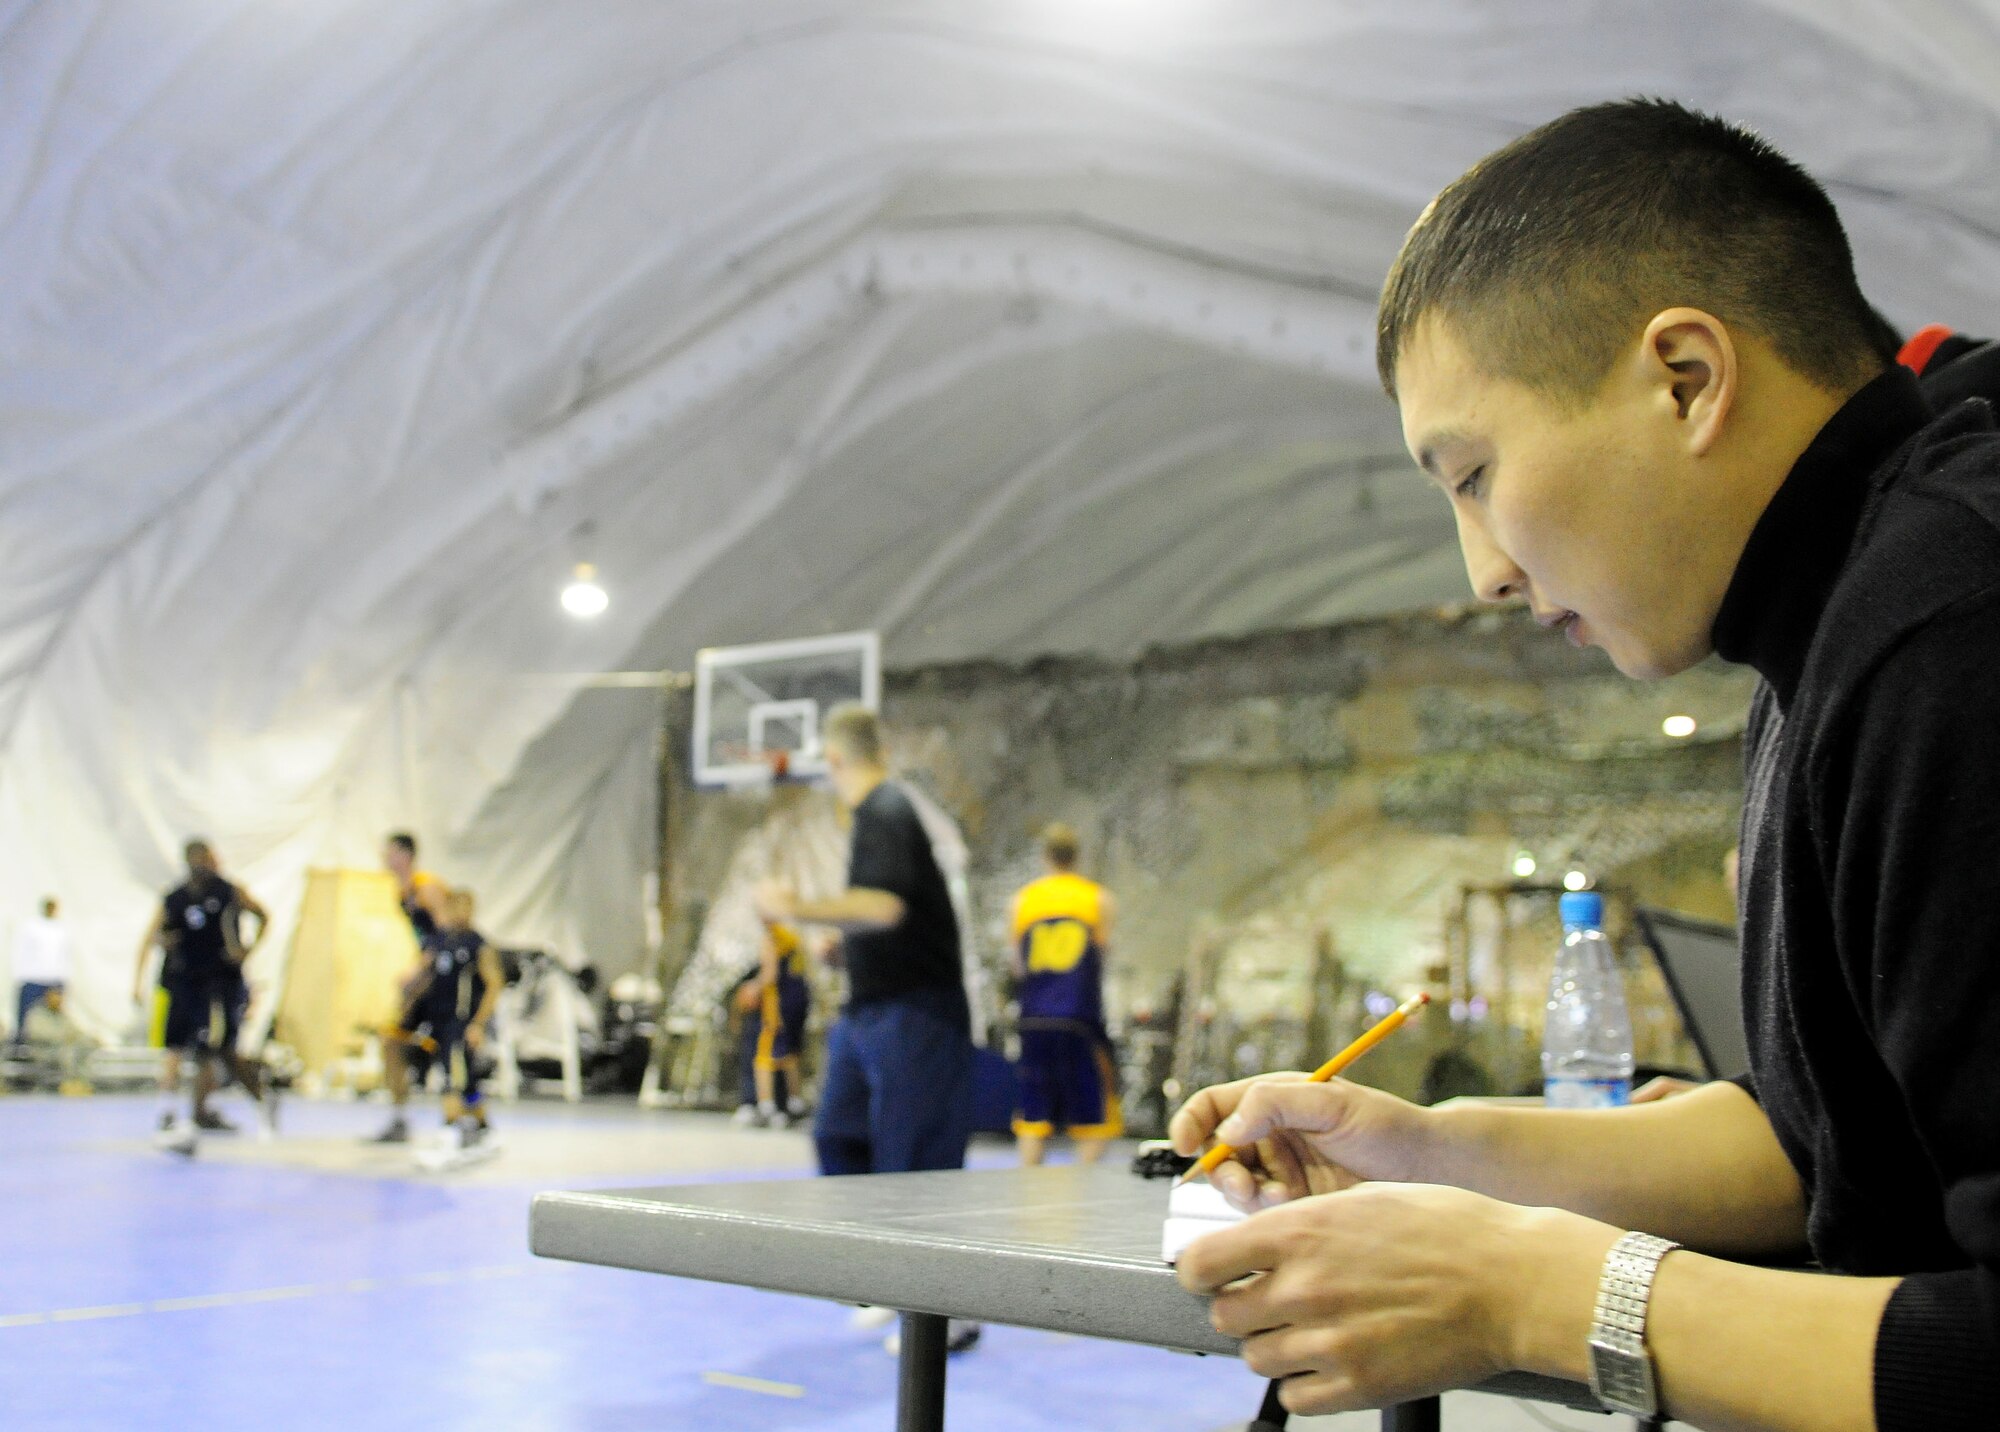 The Kyrgyz score keeper records statistics during a good will basketball game between U.S. Air Force members from the Transit Center at Manas, Kyrgyzstan and students of the Academy of Physical Culture and Sports, Jan. 19, 2010. The APCS defeated the TC team 72-55. (U.S. Air Force photo/Senior Airman Nichelle Anderson/released)